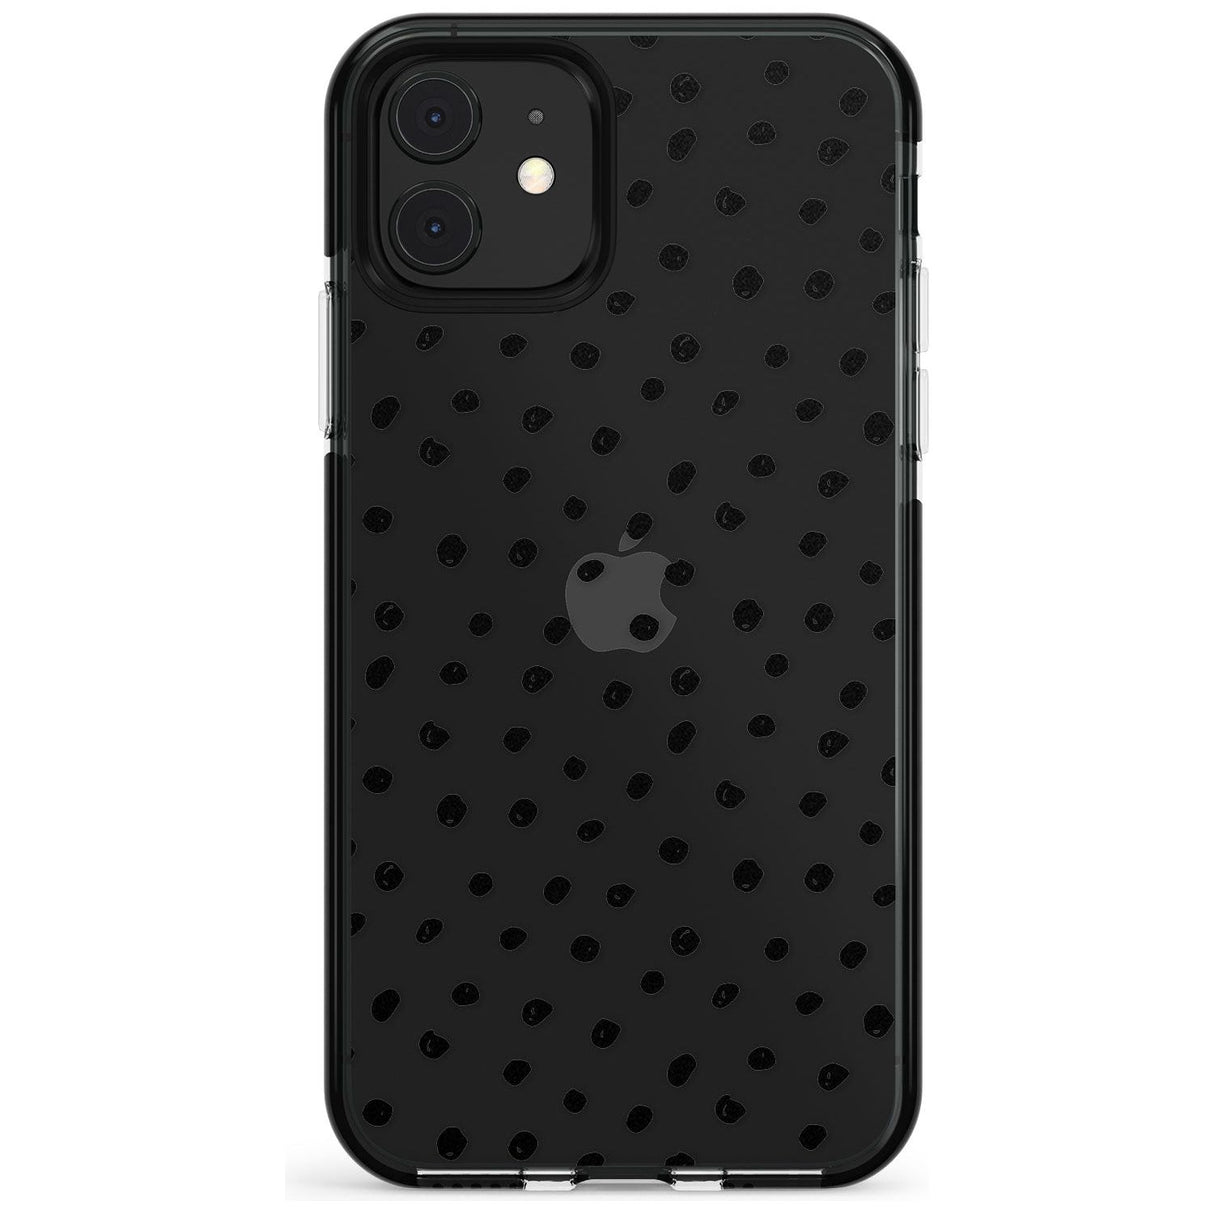 Messy Black Dot Pattern Pink Fade Impact Phone Case for iPhone 11 Pro Max